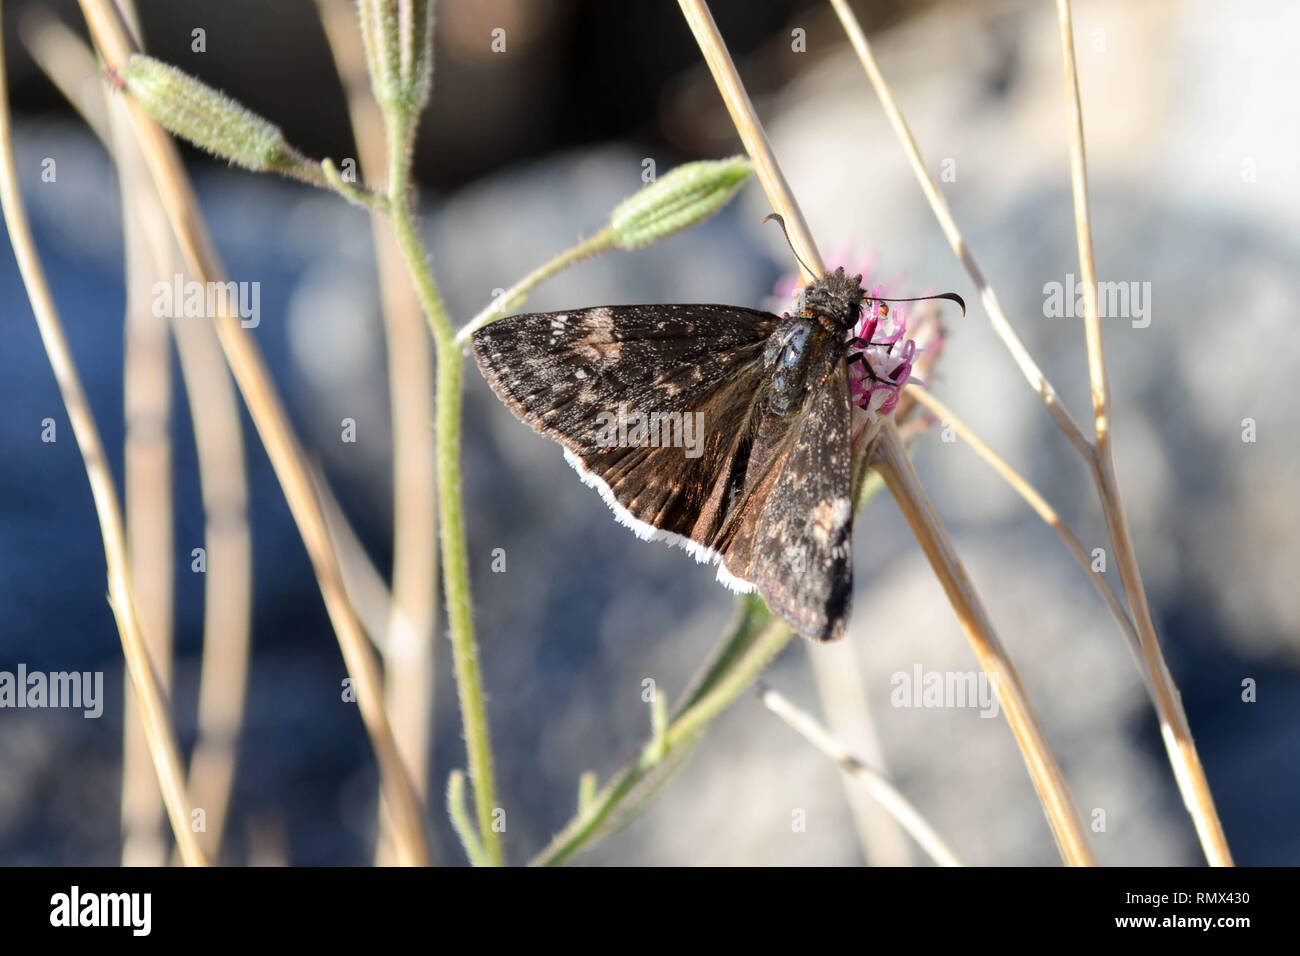 Mournful dusky-wing butterfly (Erynnis tristis) visiting a small pink flower in La Quinta, California, USA Stock Photo